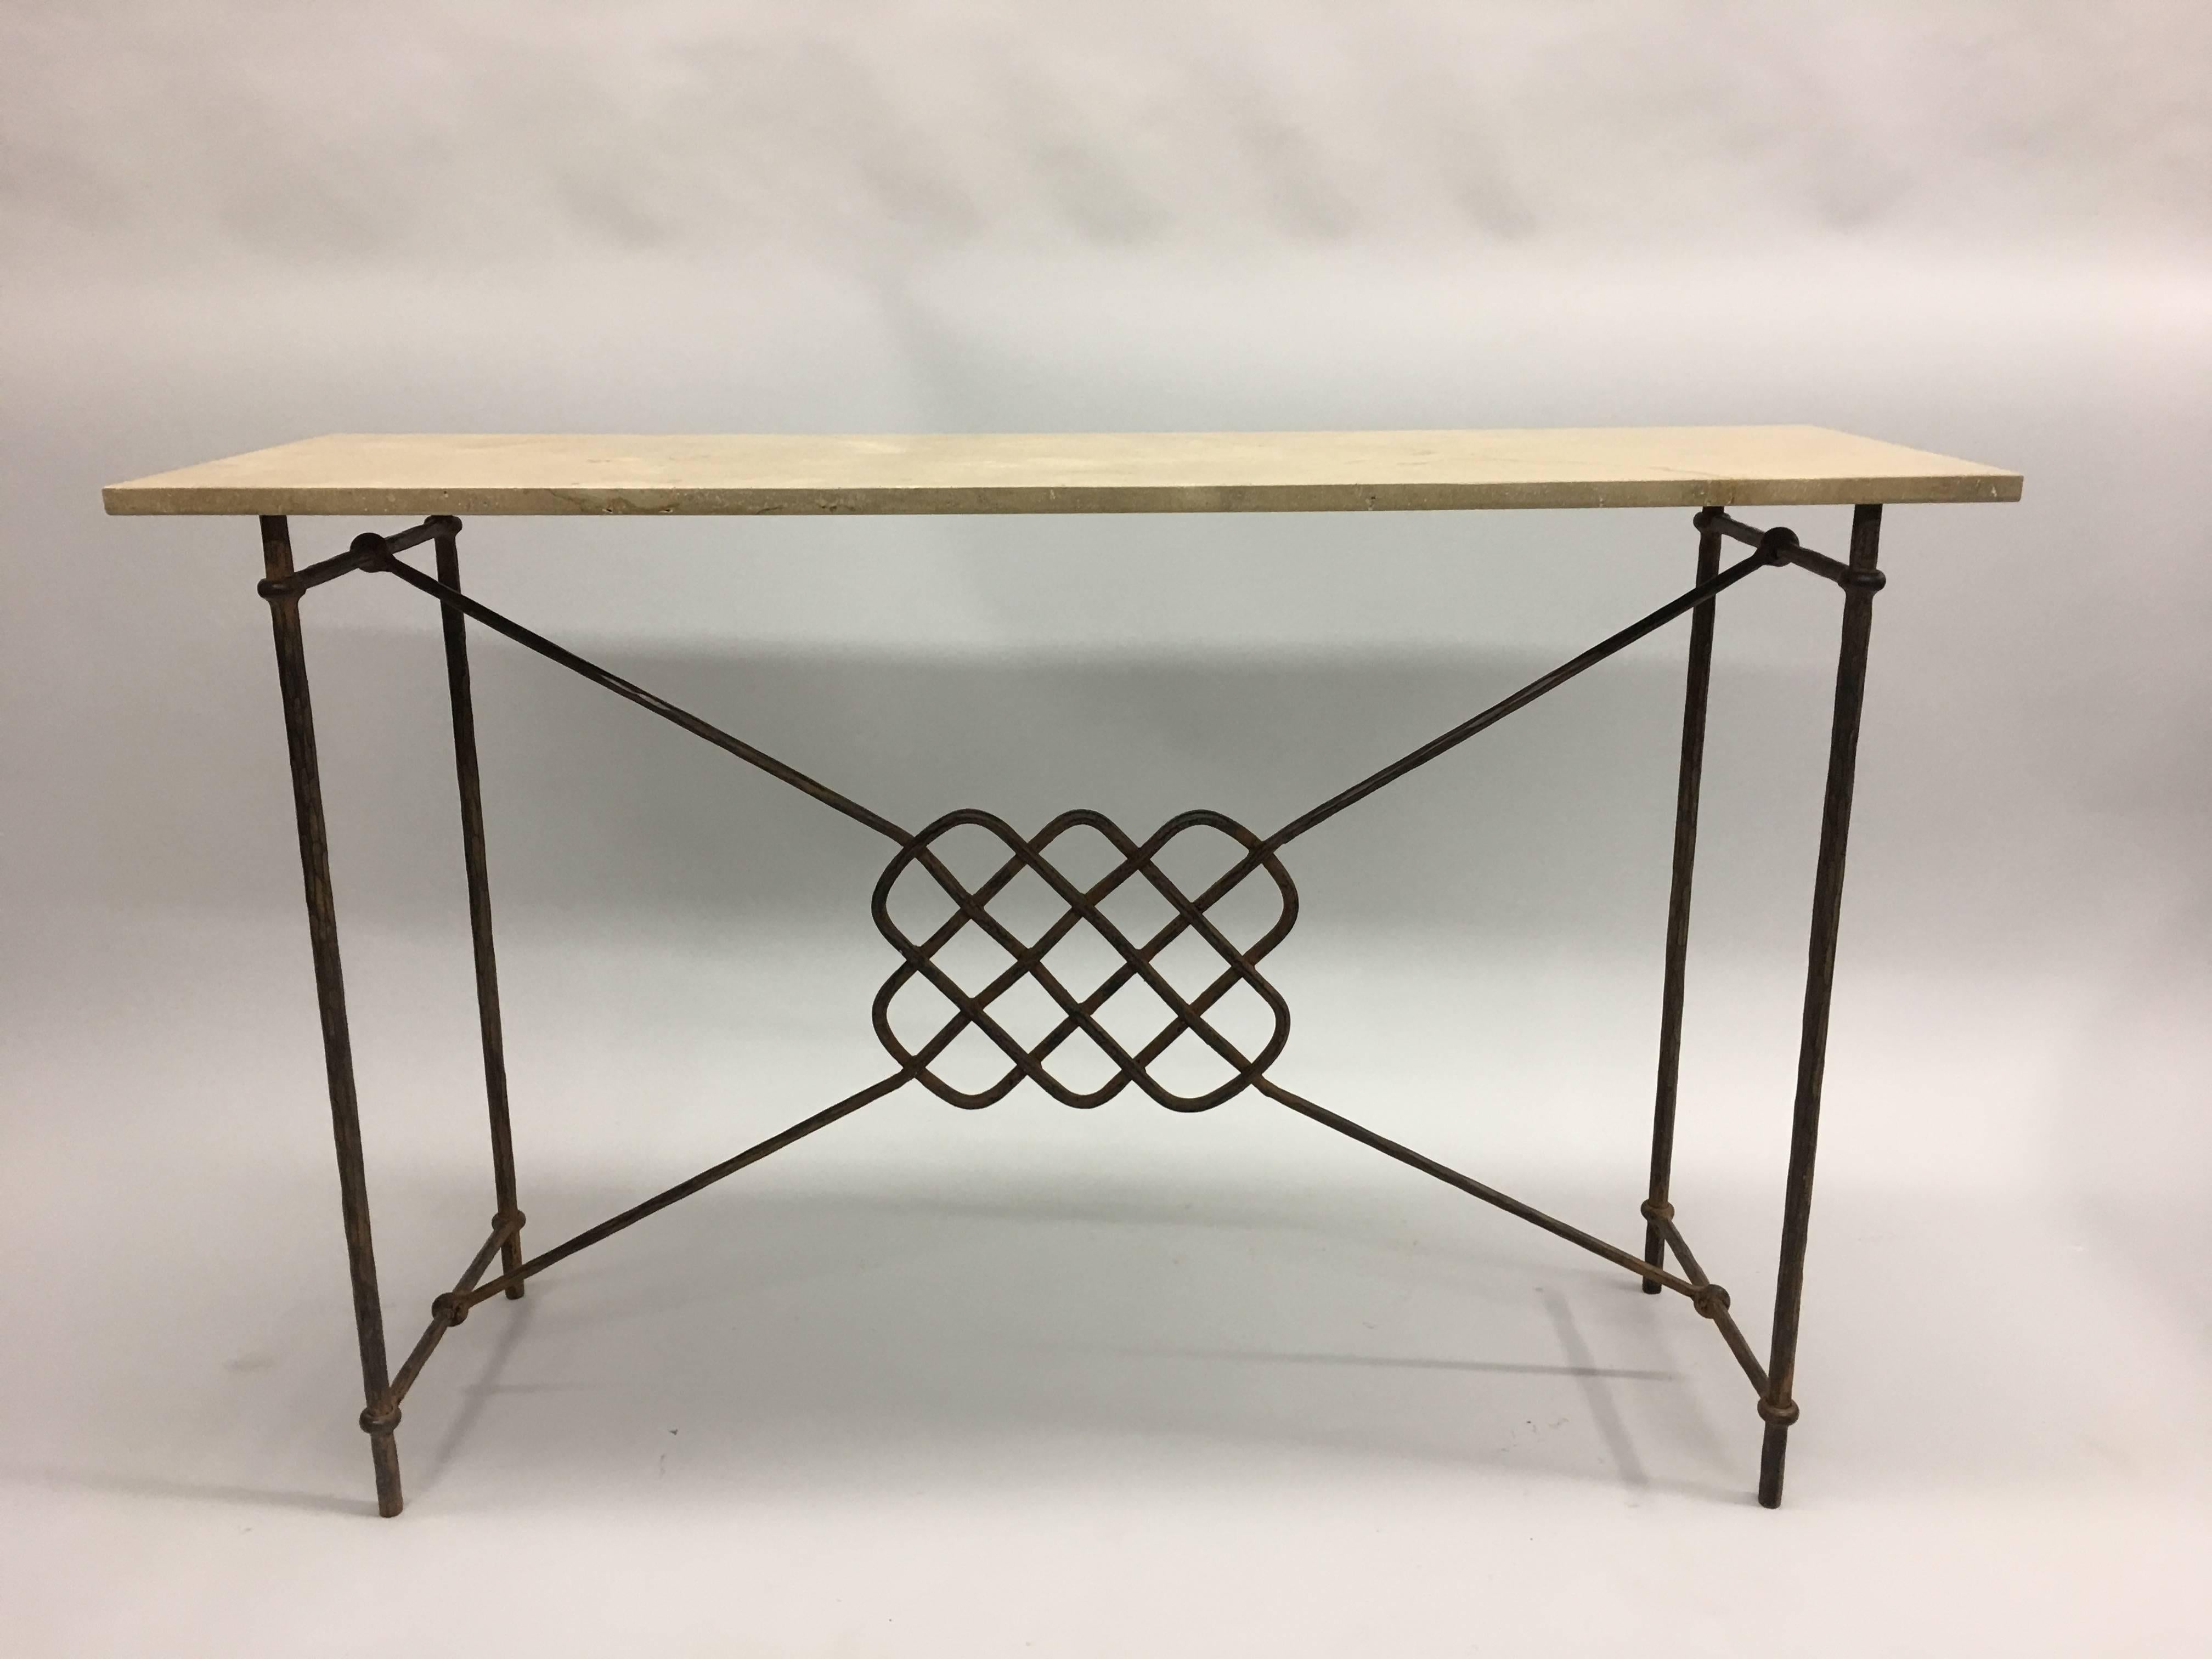 A deeply and sharply hand-hammered console in the style of Giovanni Banci in the modern neoclassical spirit. This Mid-Century piece features a dramatic hand-wrought ancient Celtic symbol in the centre panel. The top is composed of Italian